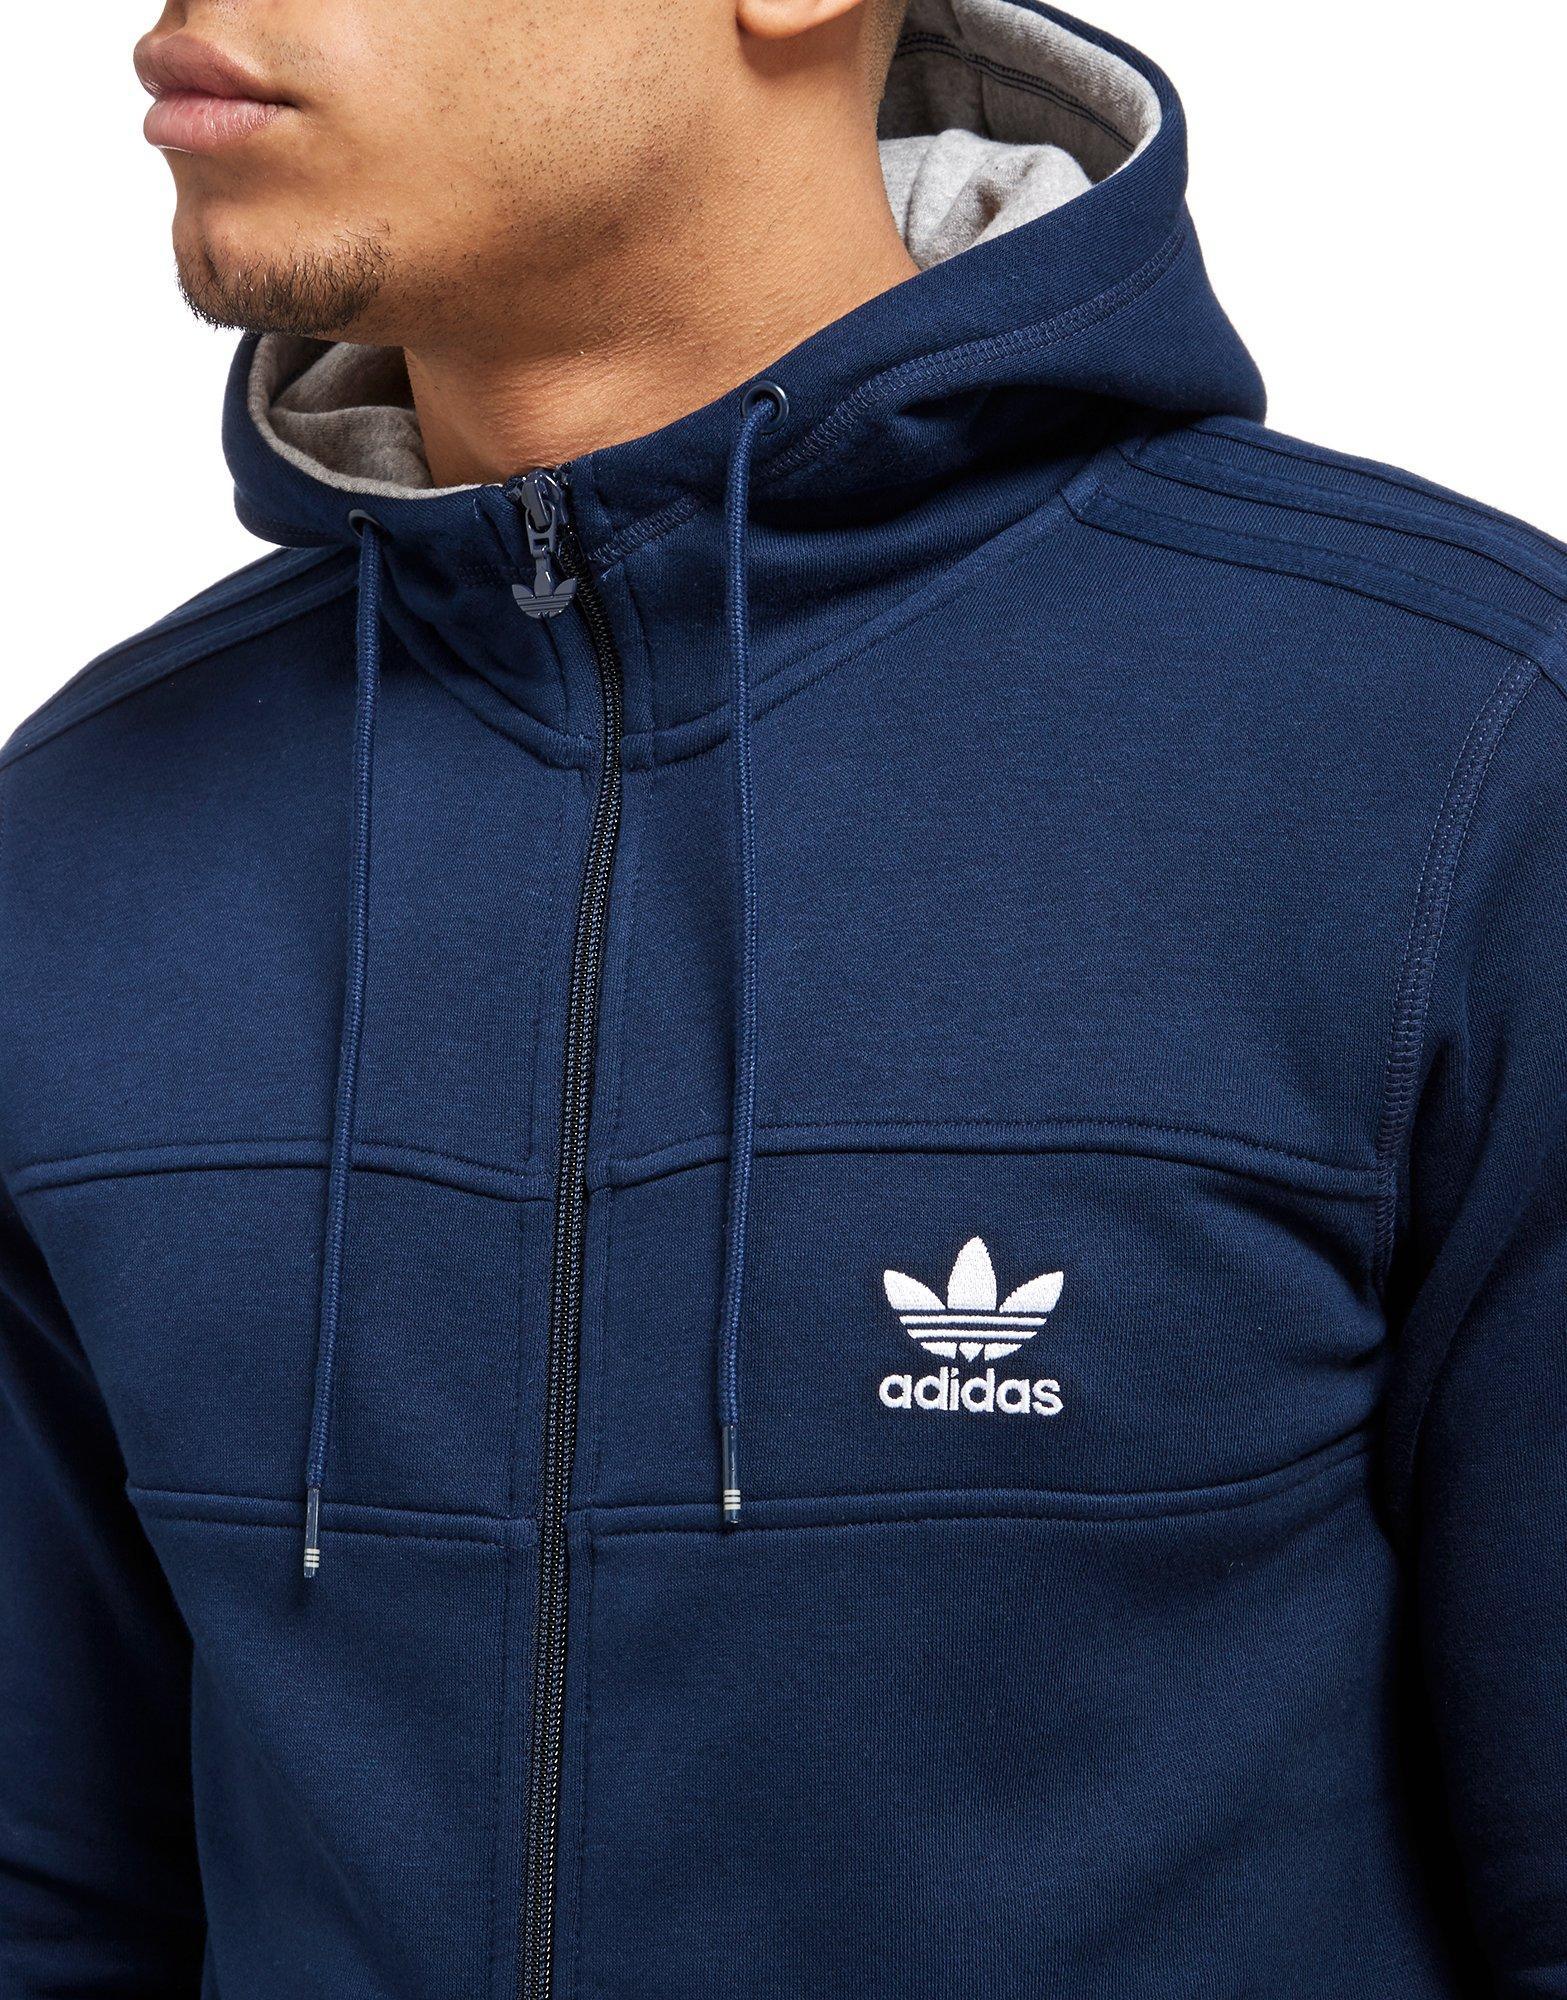 adidas Originals Synthetic Trefoil Full Zip Hoodie in Blue/White (Blue